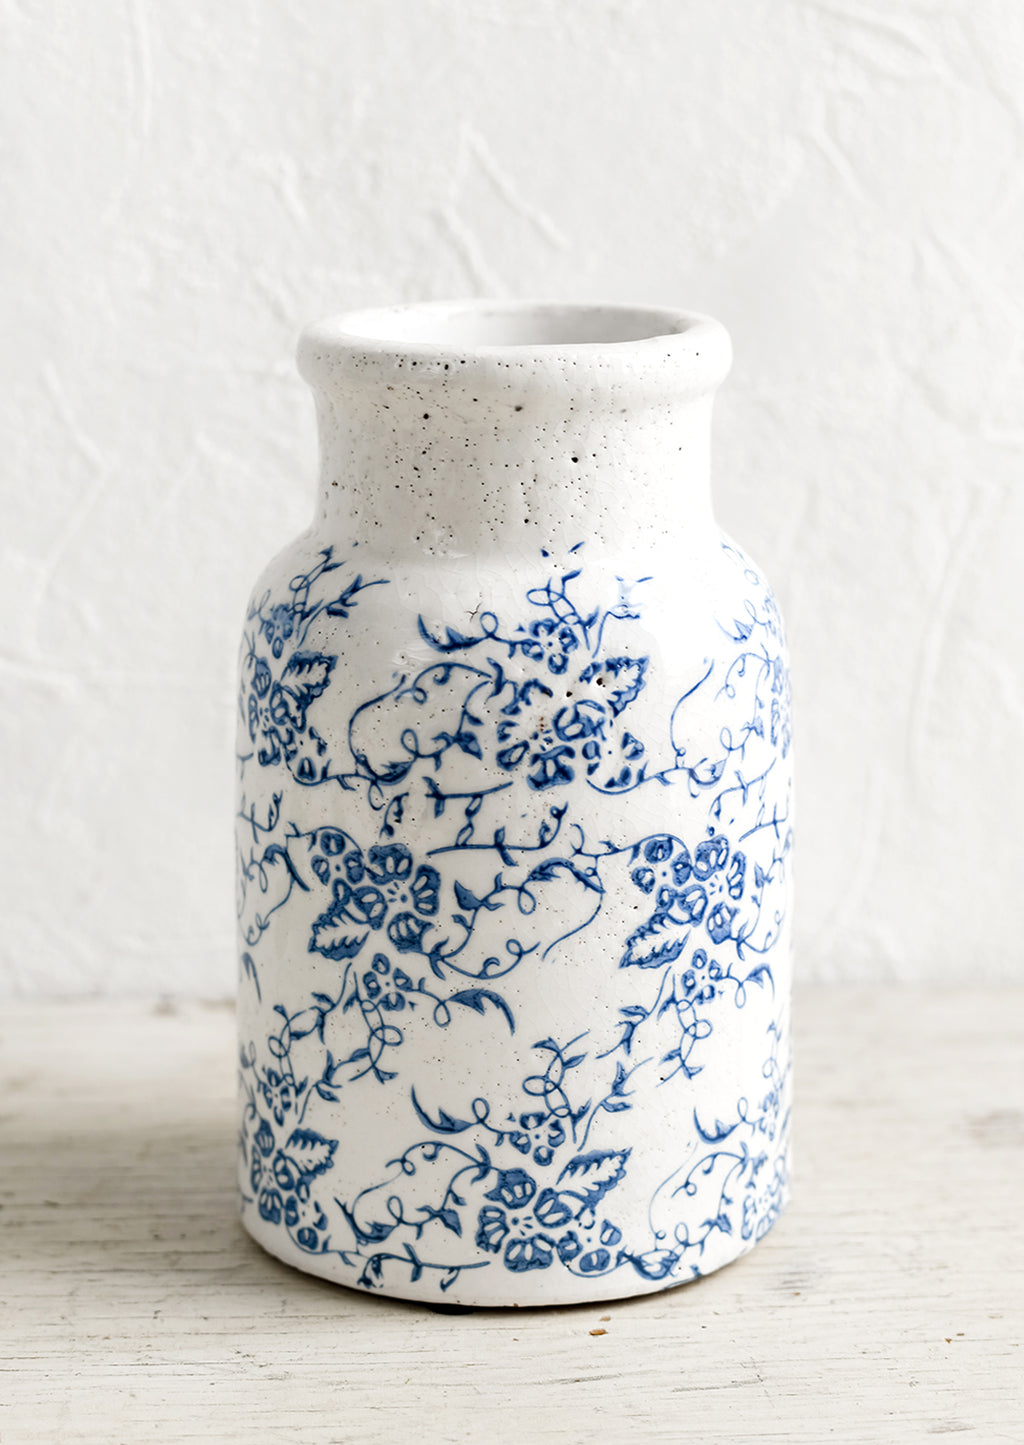 1: A blue and white ceramic vase with antique floral print.